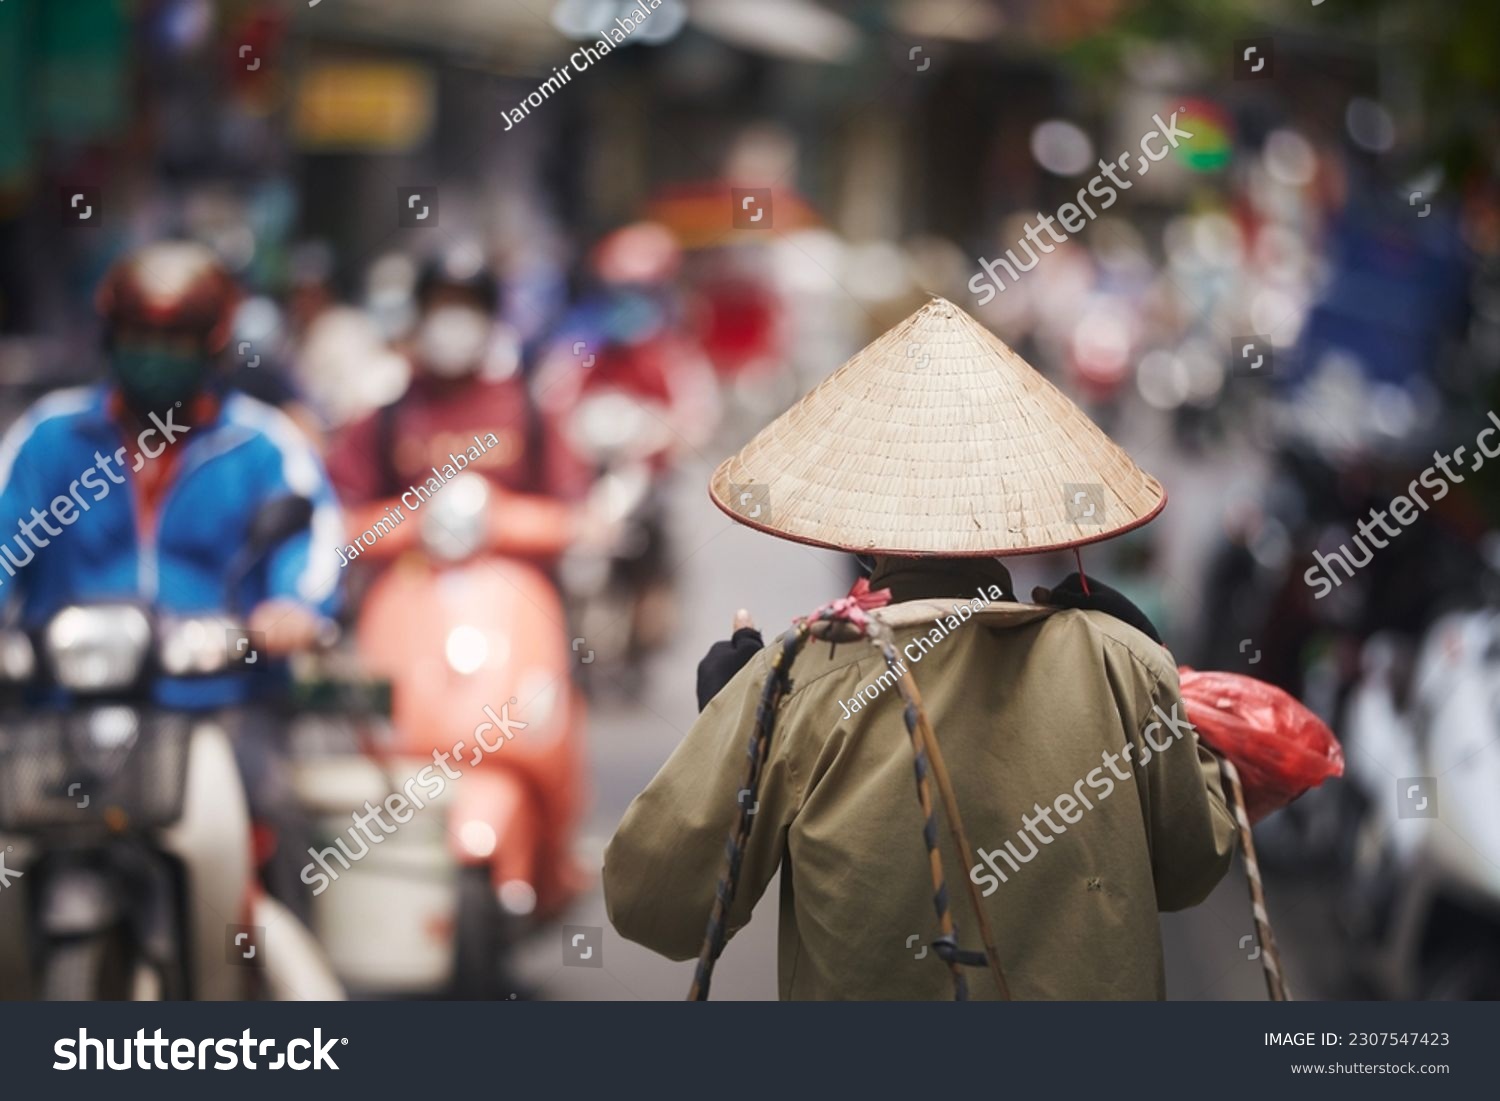 Selective focus on traditional conical hat of person walking against traffic motorbikes on busy street in Old Quarter in Hanoi, Vietnam.
 #2307547423